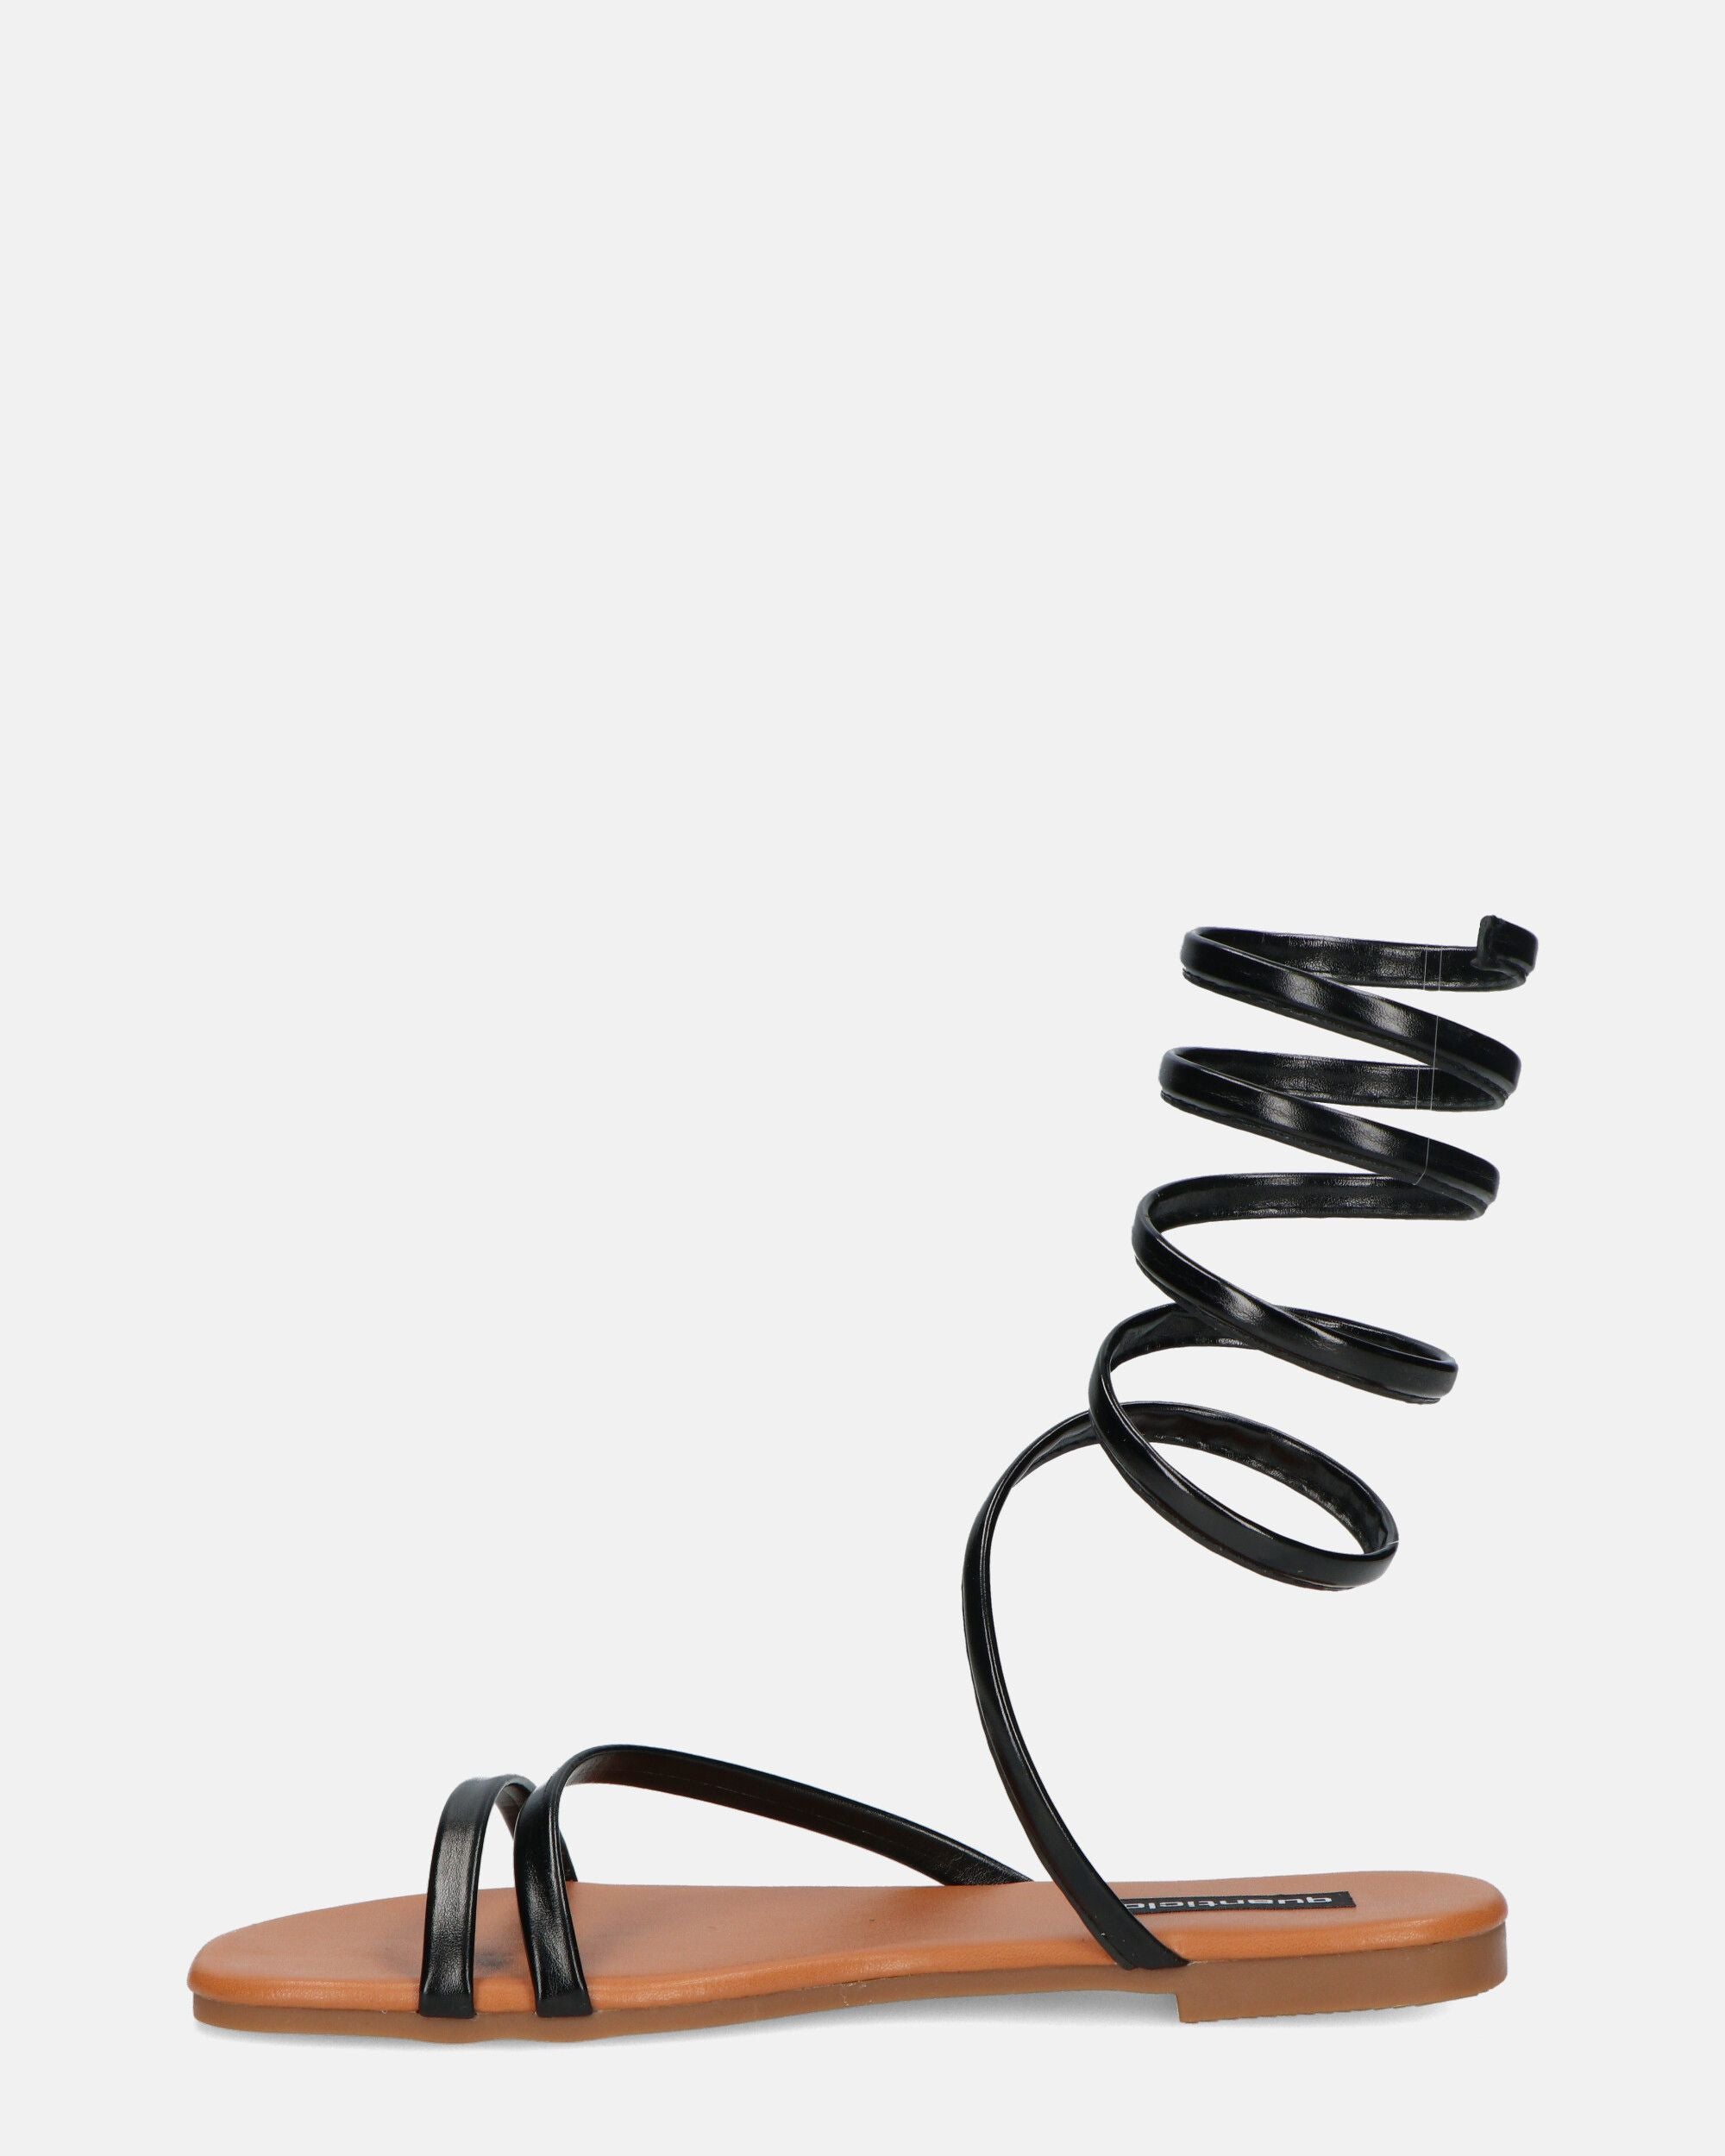 SIENNA - sandals with black sole and white spiral